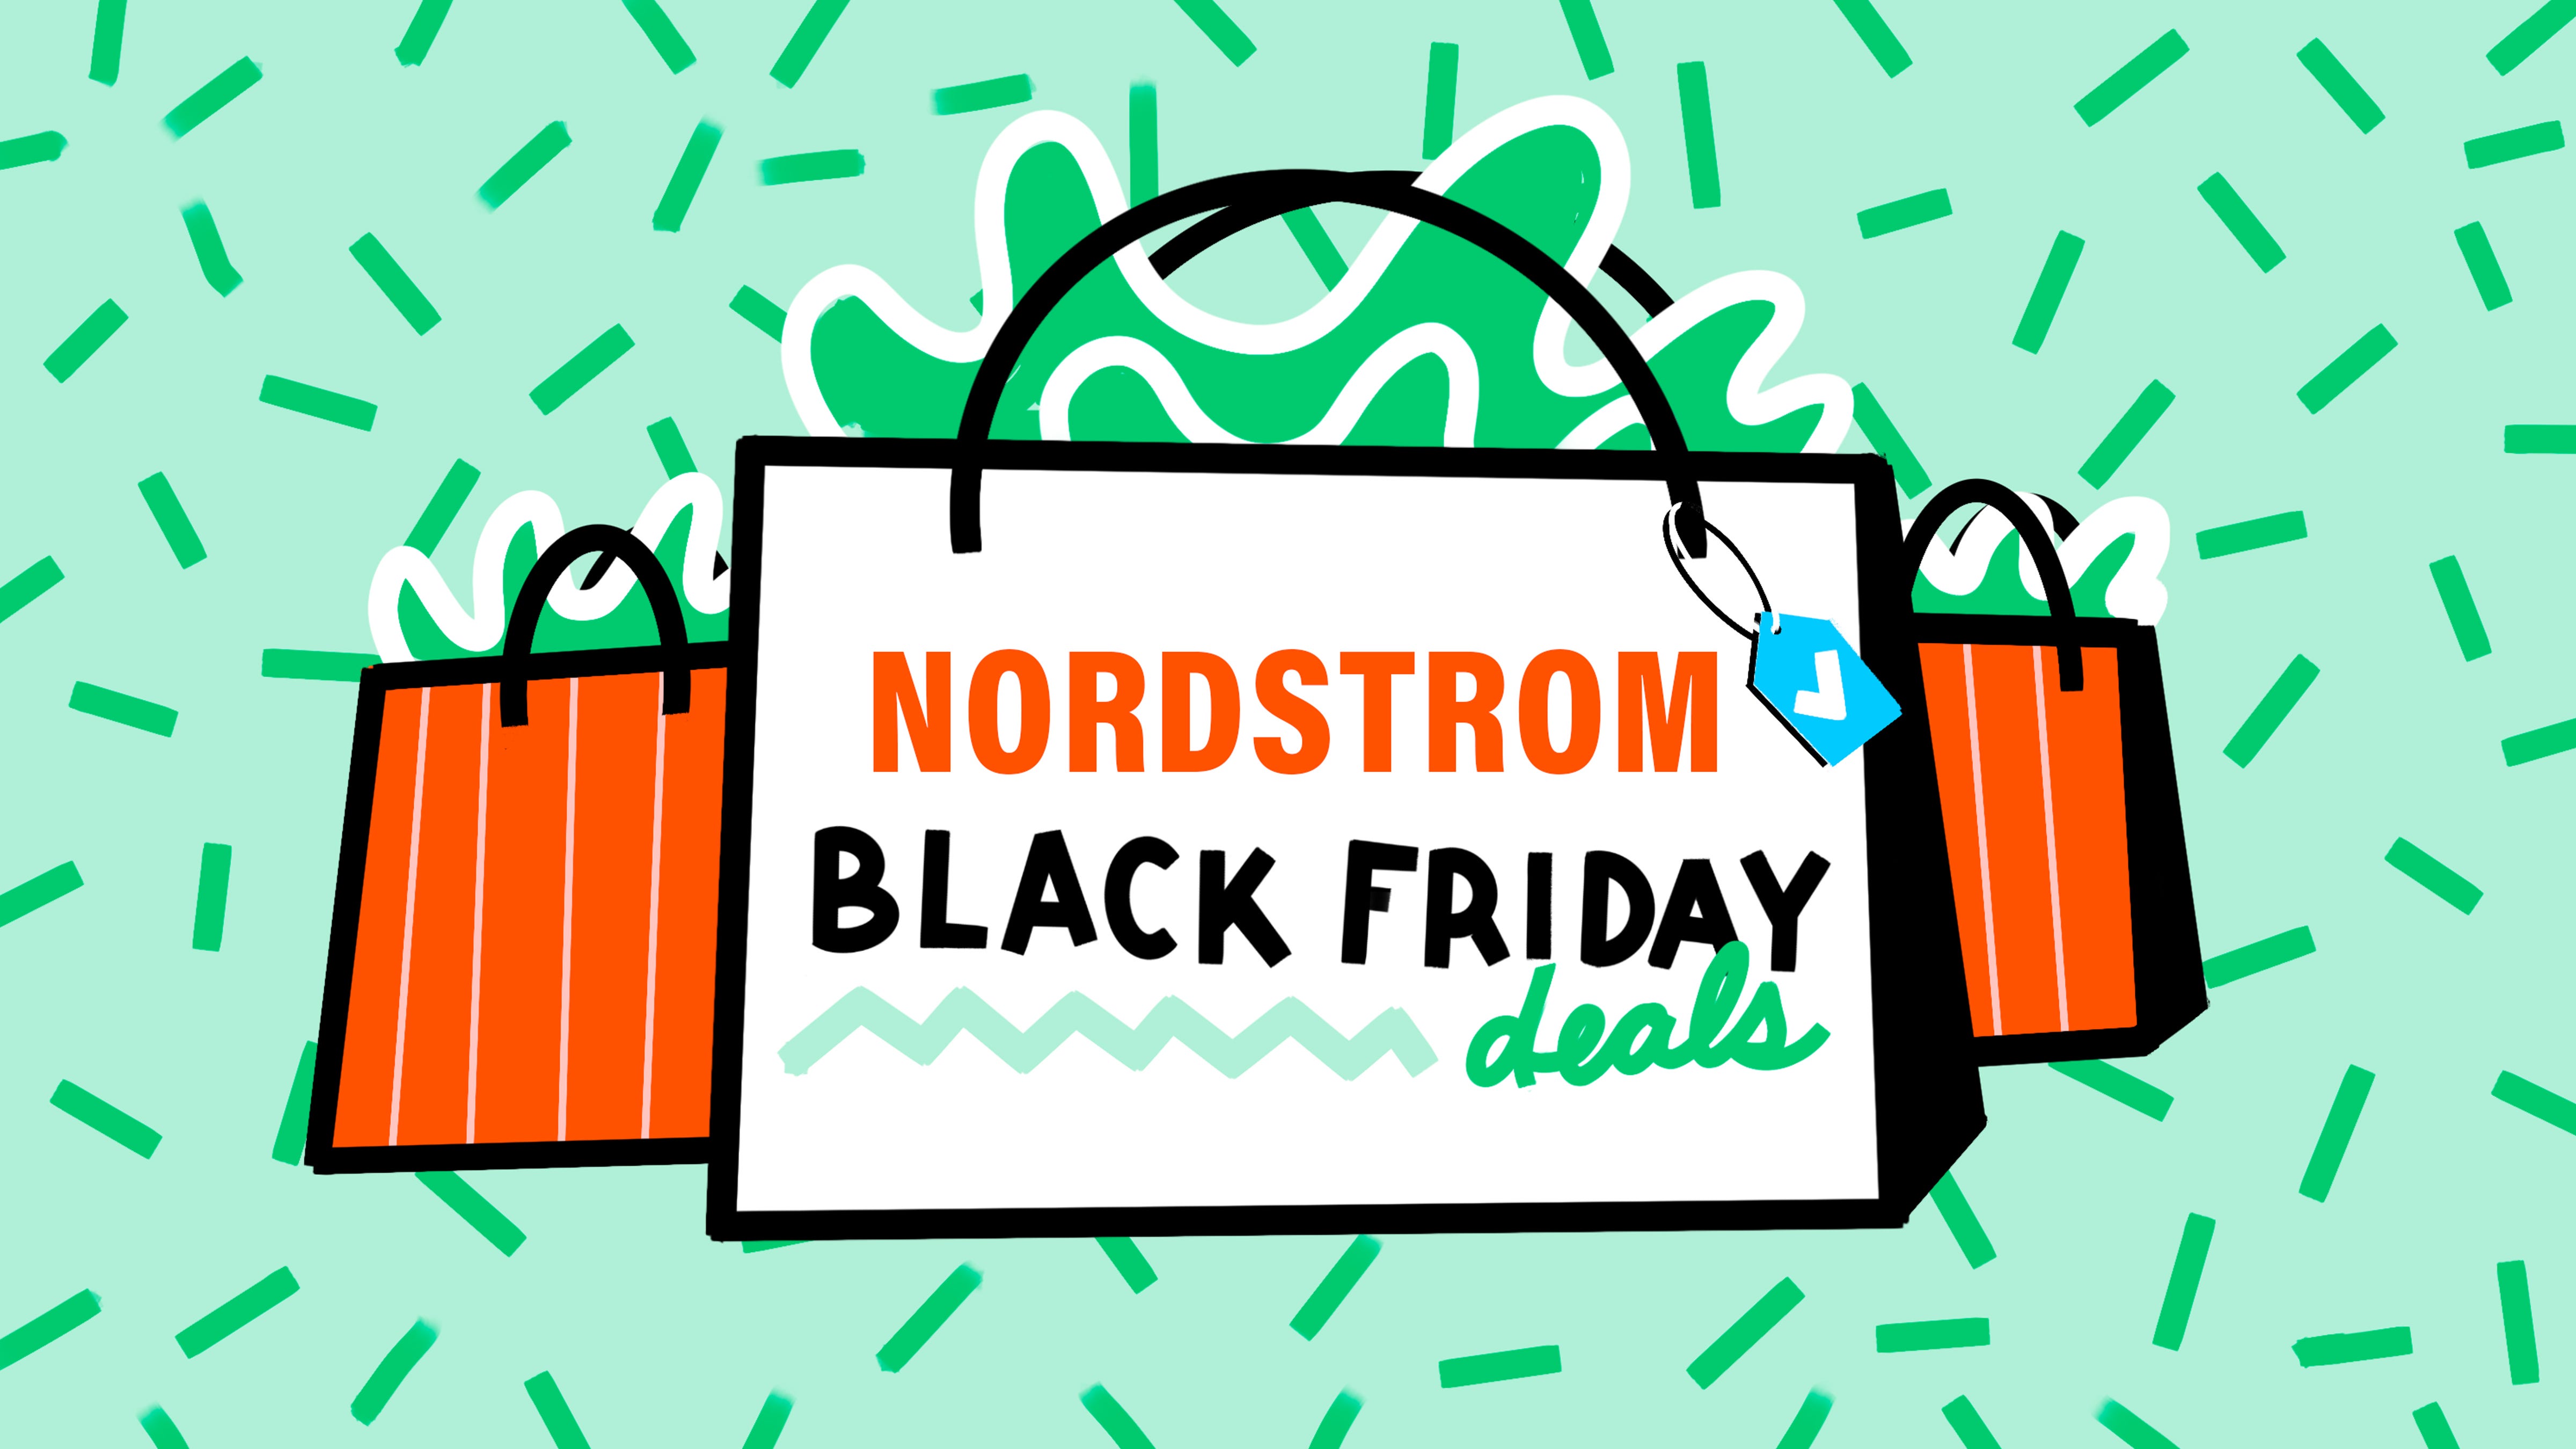 Nordstrom Black Friday deals: Save on style from Zella, Tory Burch and  Adidas